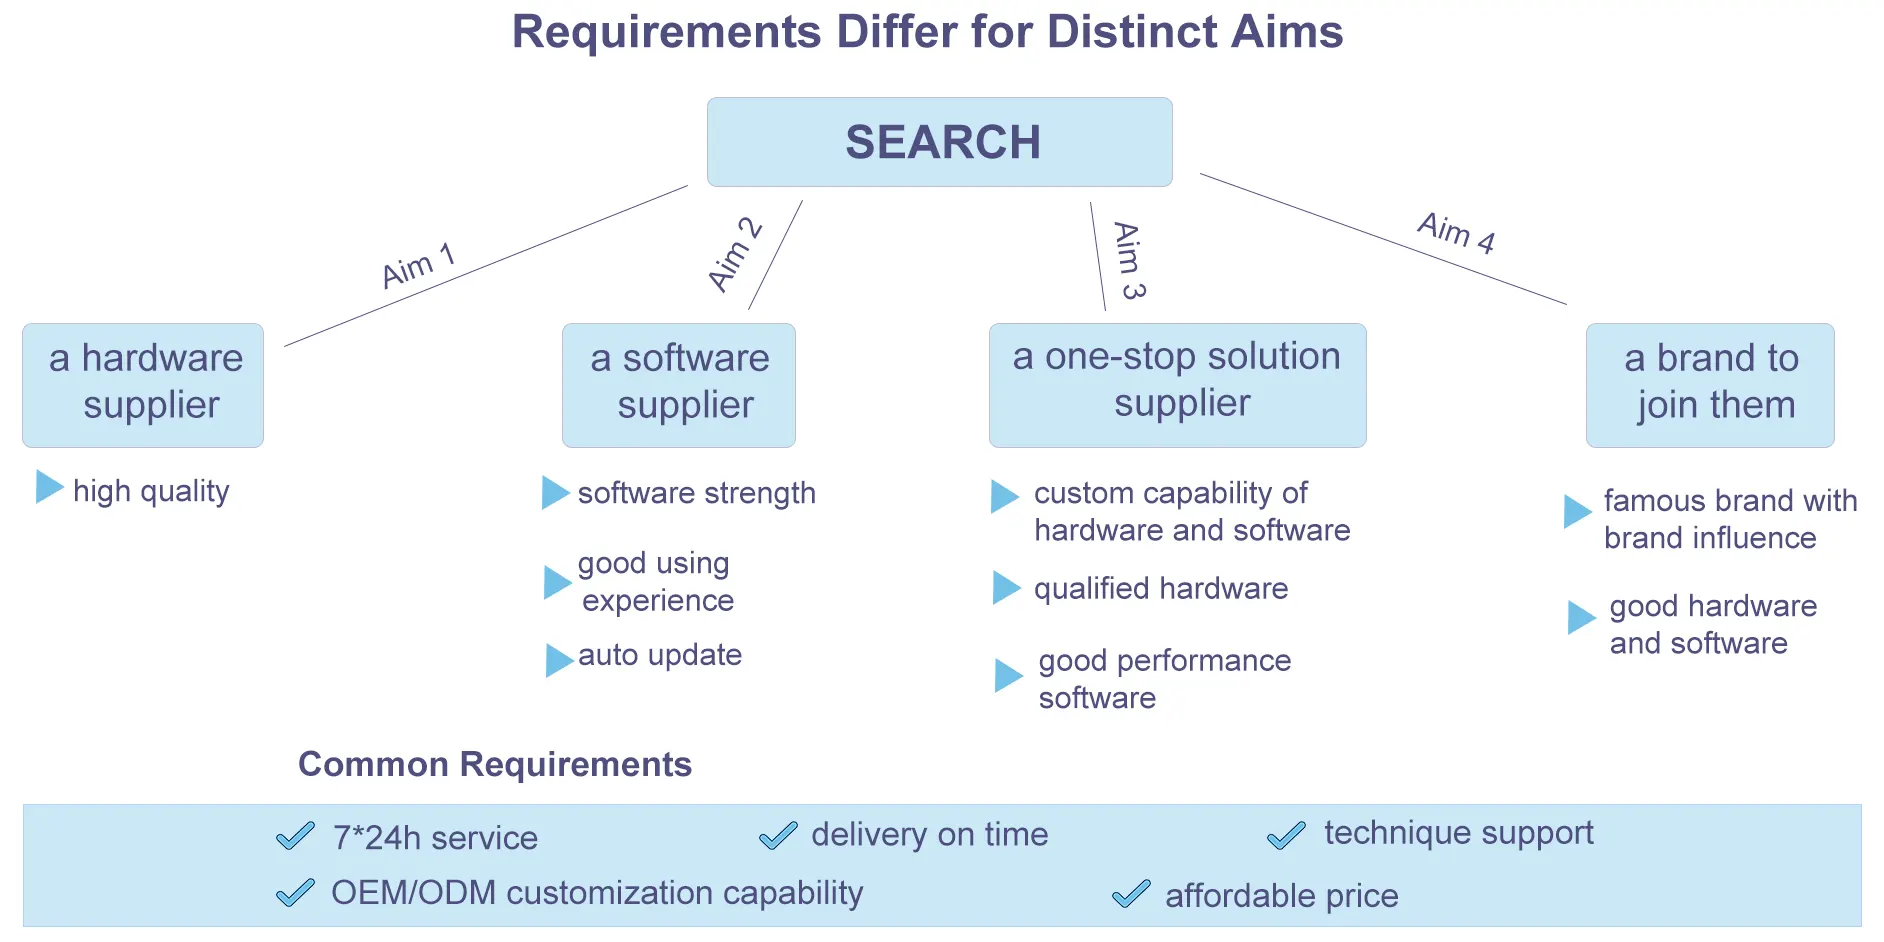 requirements for distinct aims